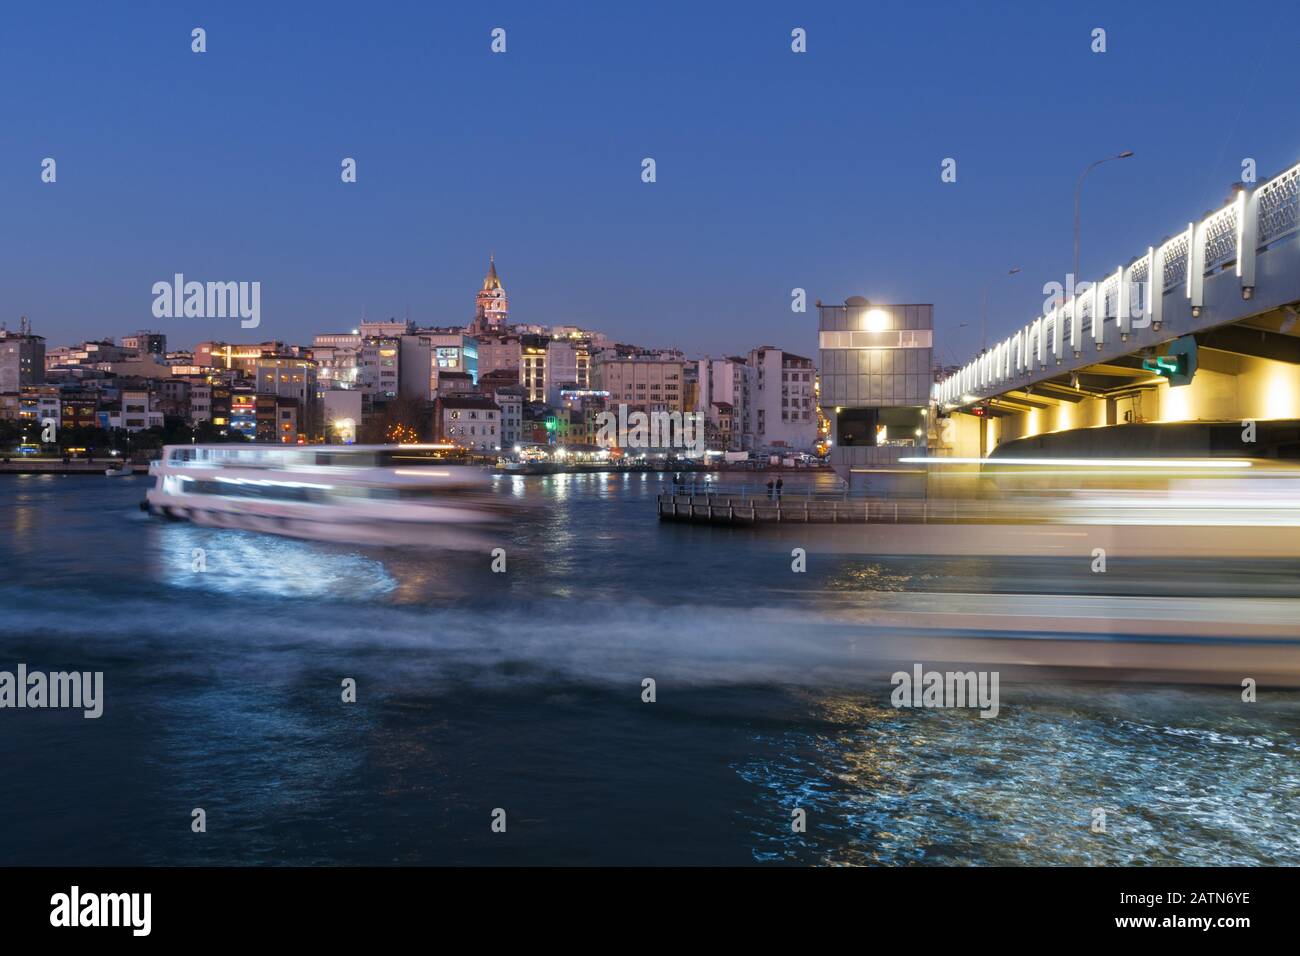 Istanbul, Turkey - Jan 10, 2020: Ferry boat in Golden Horn at the Galata Bridge with Galata Tower in background, Istanbul, Turkey, Europe Stock Photo